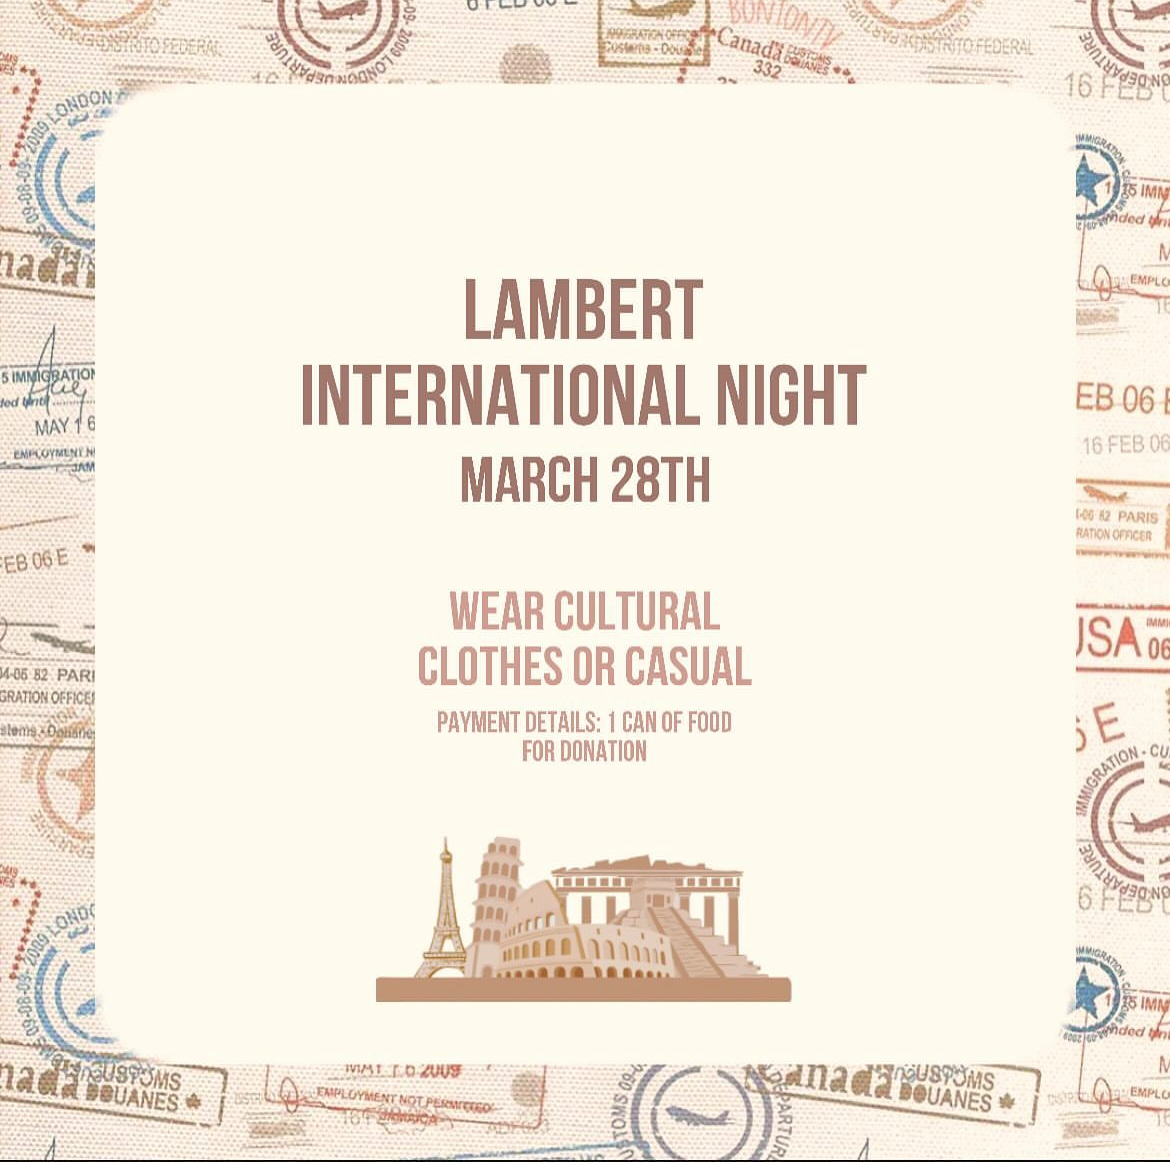 This is an image of Lambert International Club’s Instagram post for International Night. (Courtesy of Lambert International Club’s Instagram) 